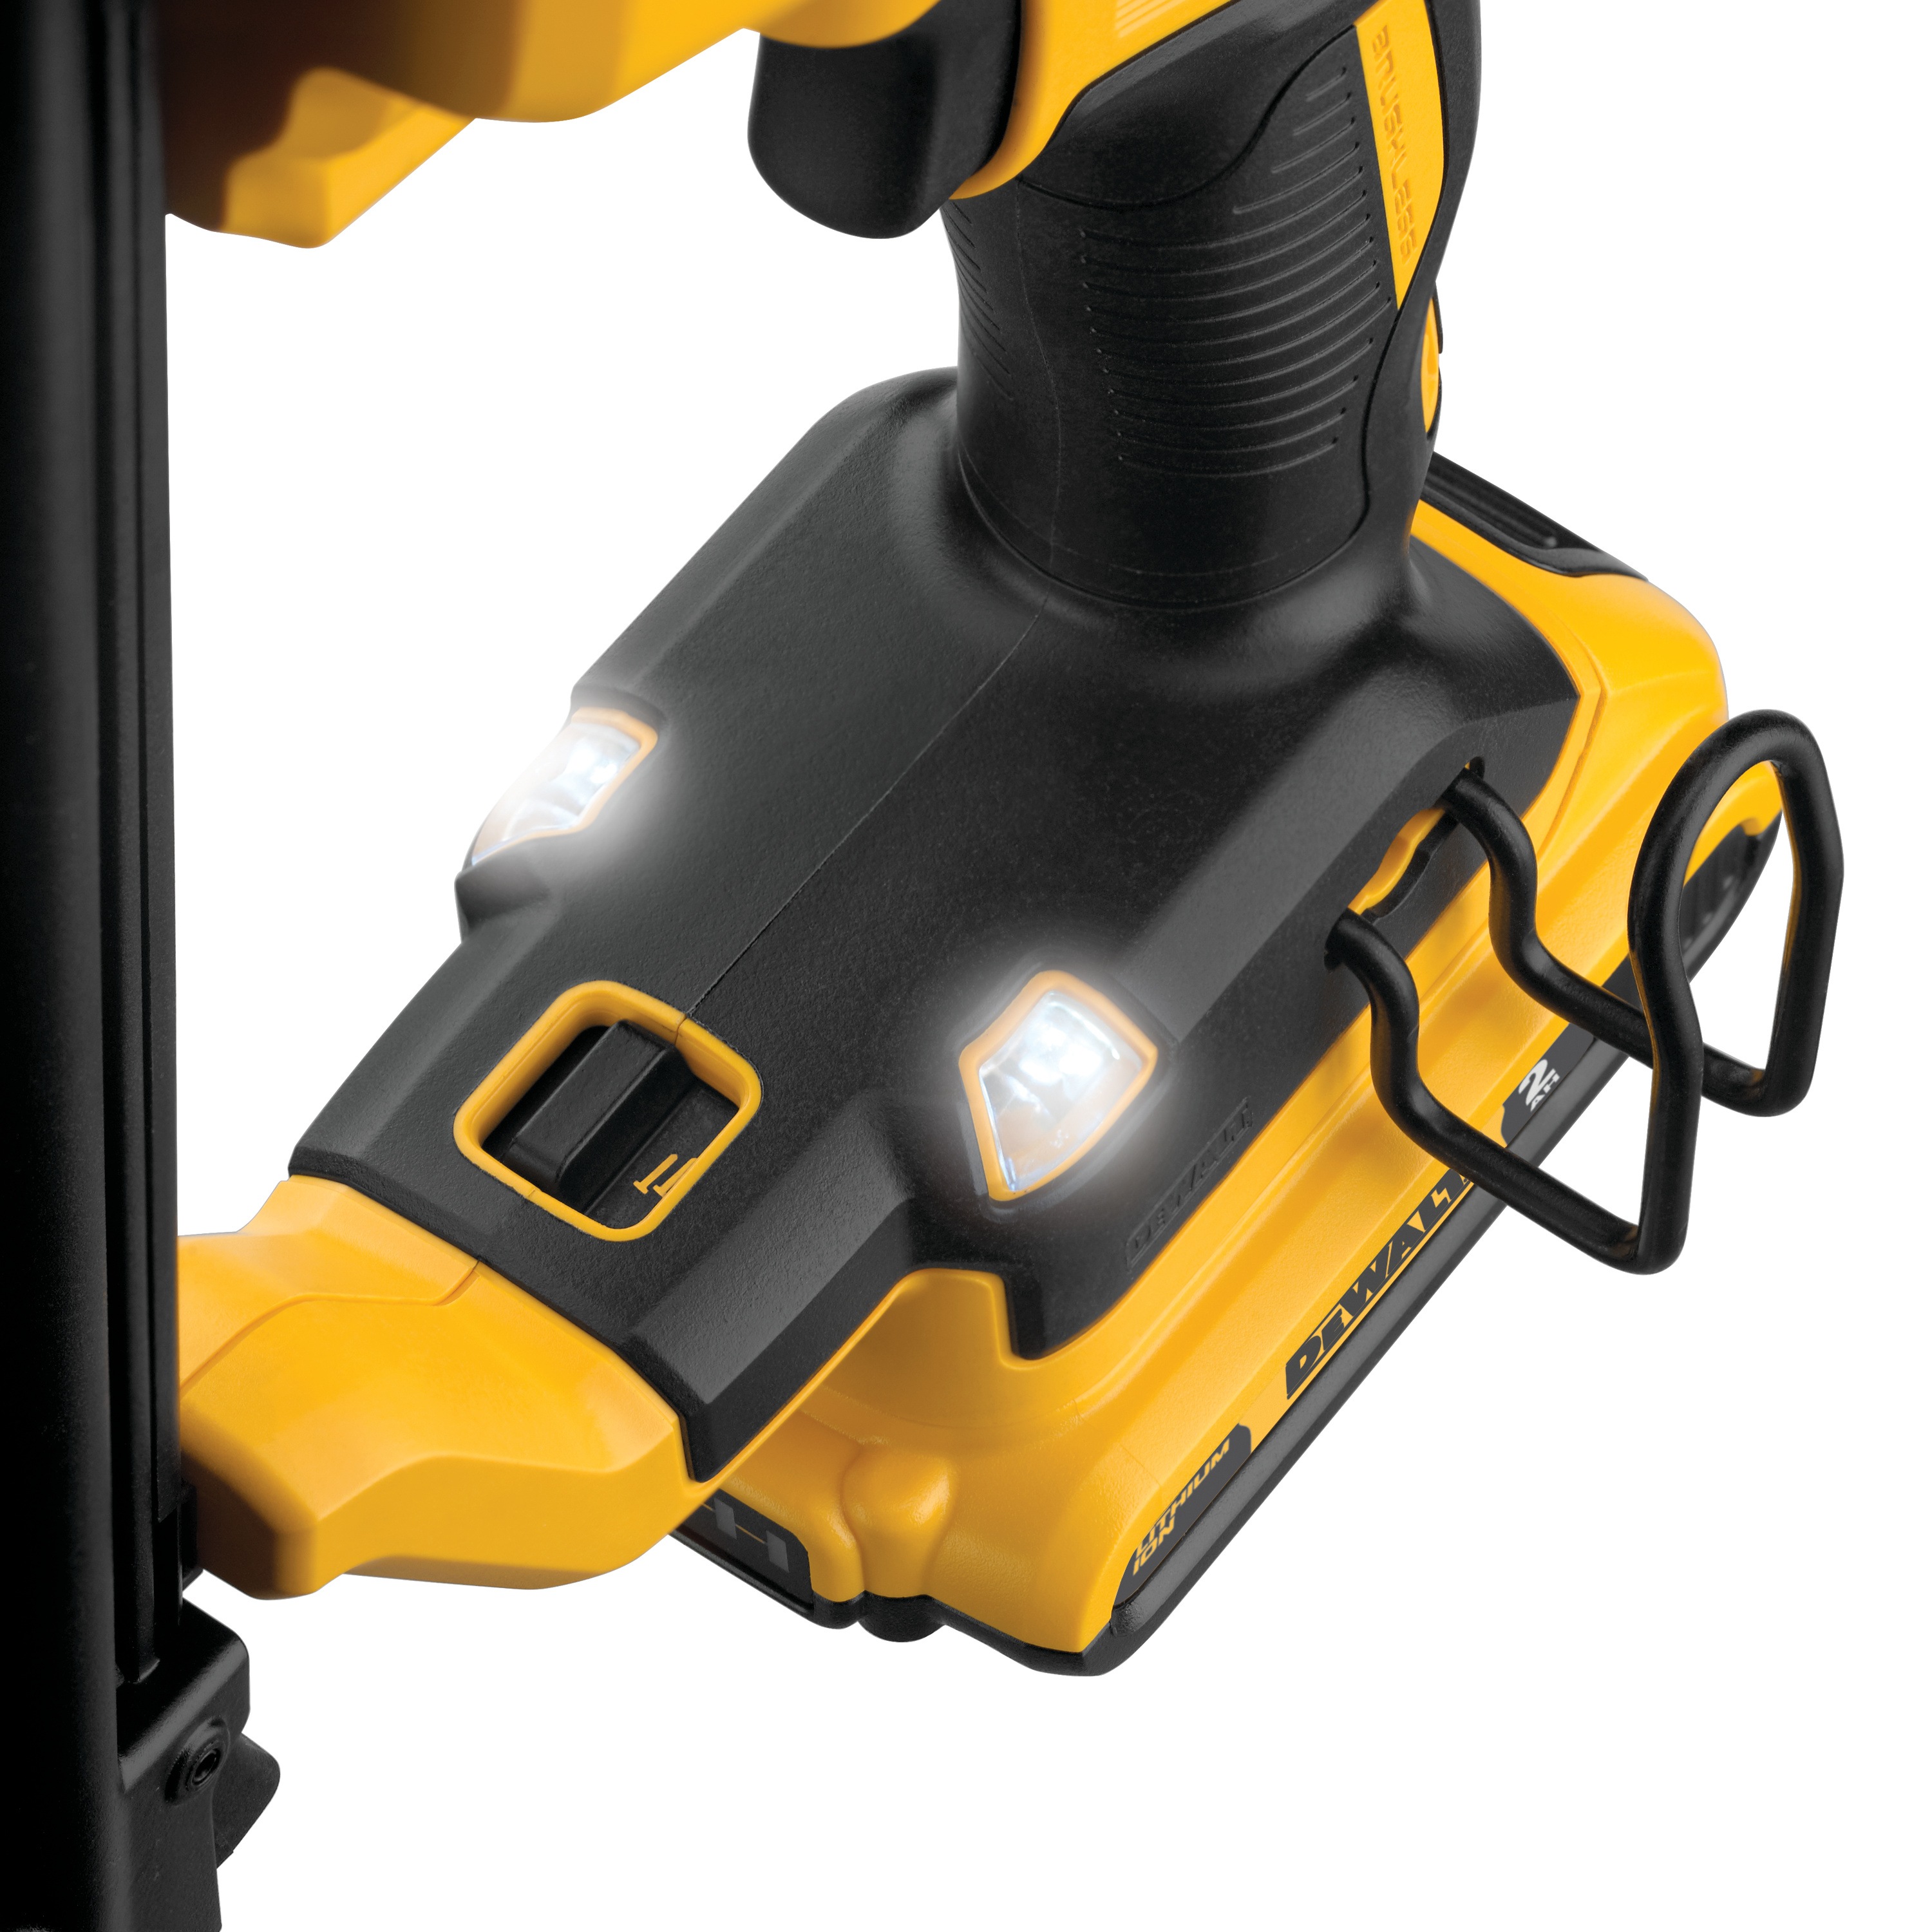 Close up of lights feature at base of a  XR 18 gauge Cordless Brad Nailer